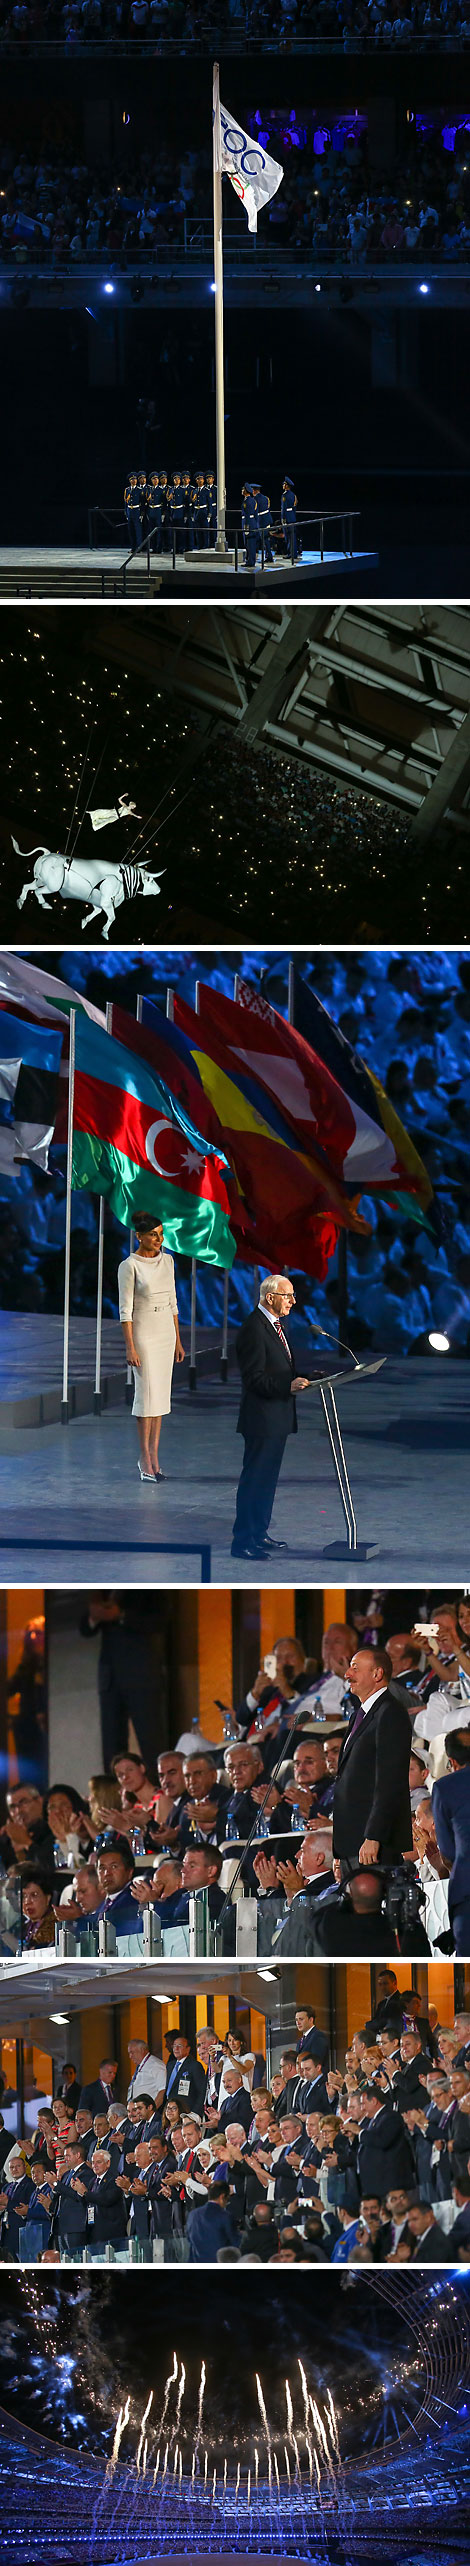 The opening ceremony of the 1st European Games in Baku